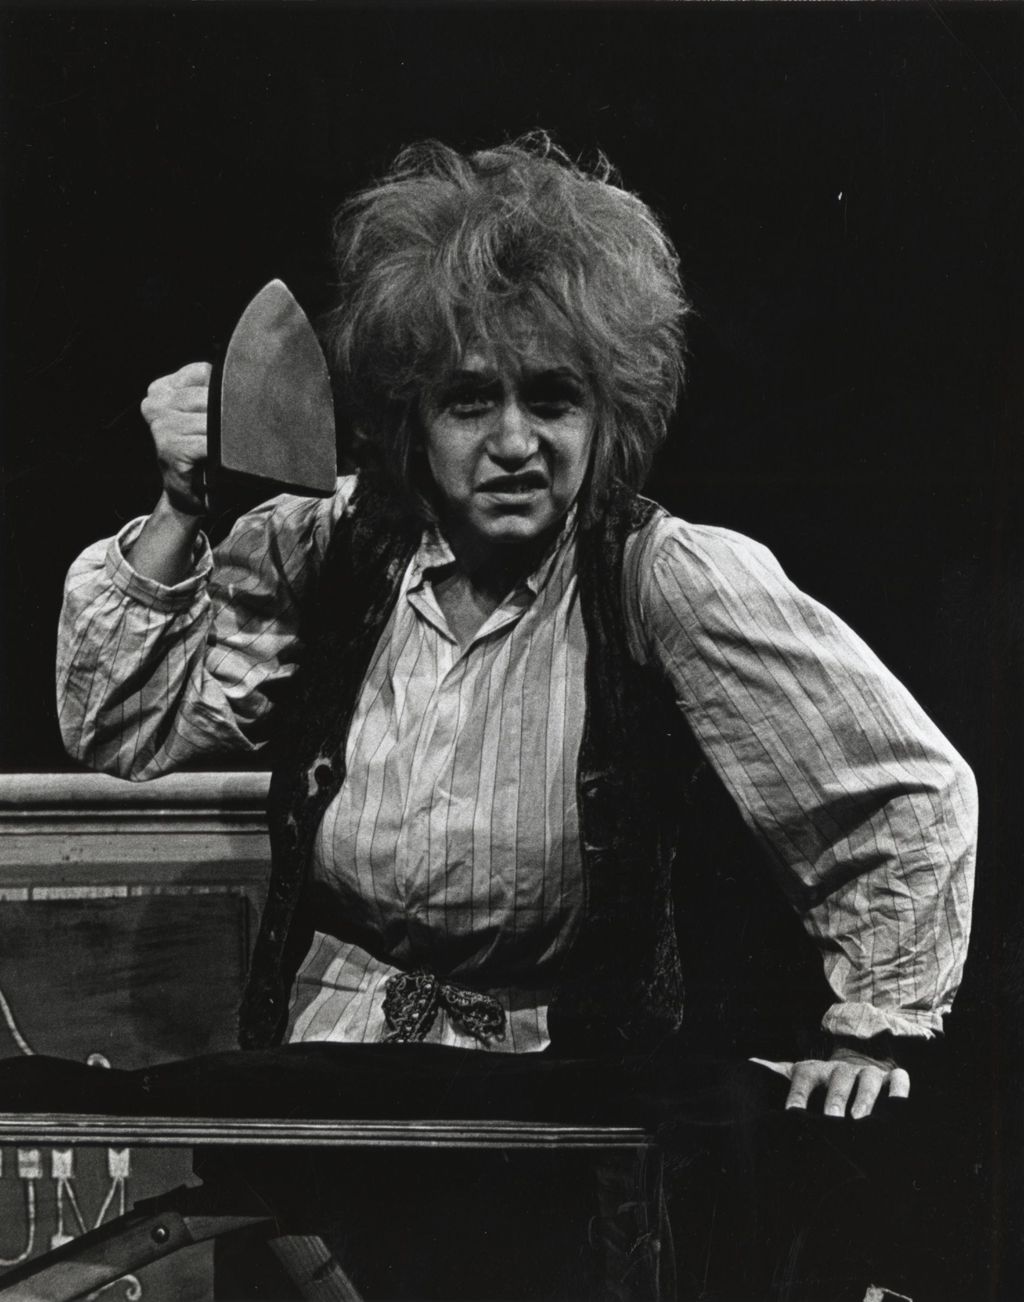 Barbara Eskin on stage in a production of "The Threepenny Opera" at Hull-House Theater